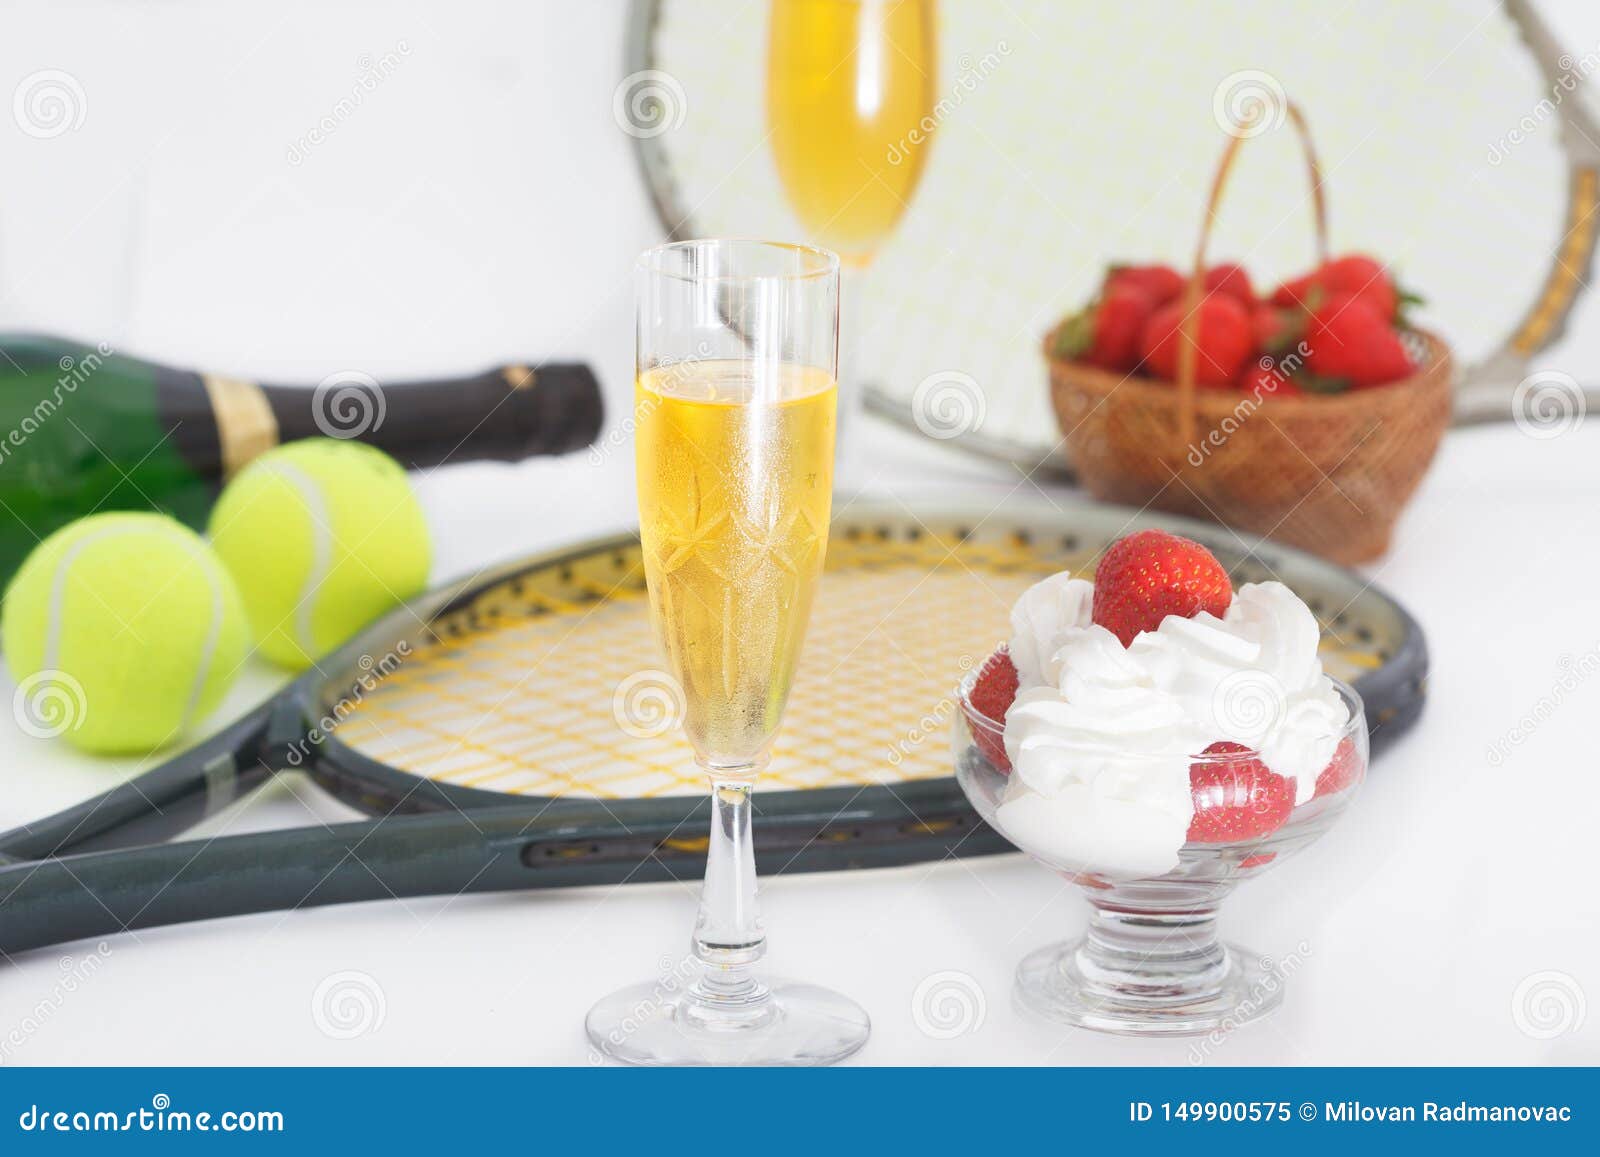 strawberries and champagne with tennis equipment on wimbledon tournament